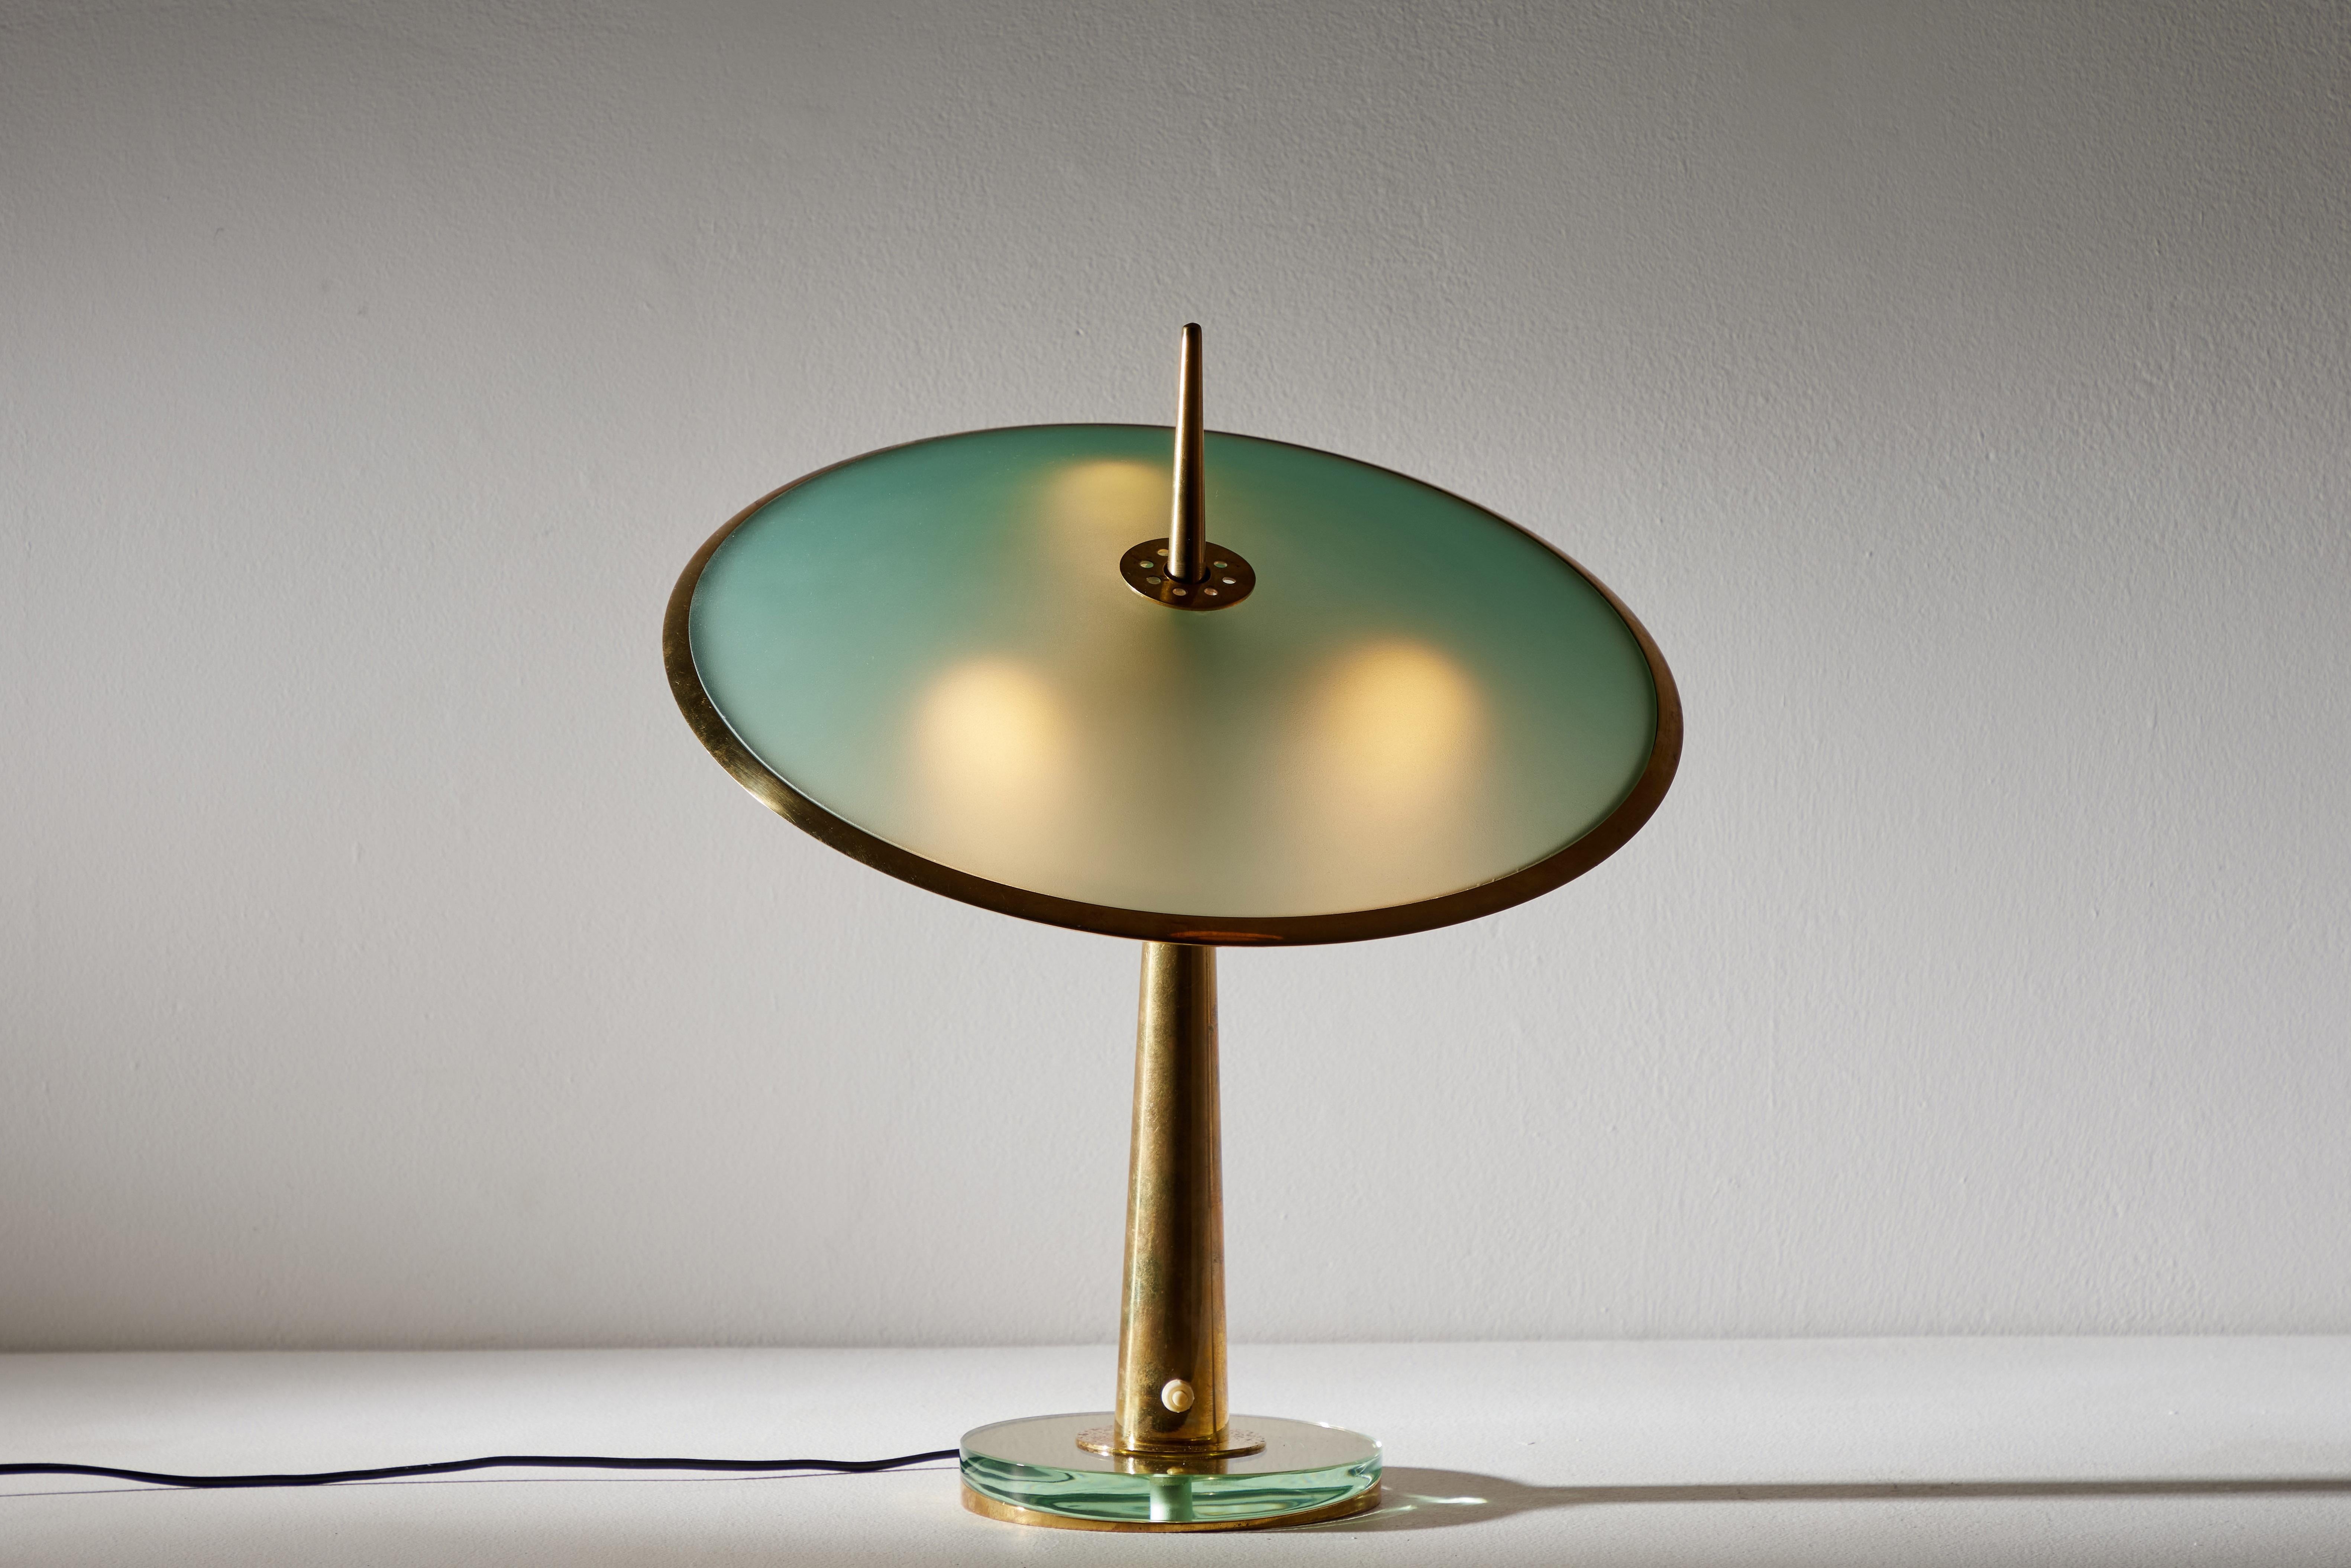 Model no. 1538 table lamp by Max Ingrand for Fontana Arte. Designed and manufactured in Italy, circa 1950's. Glass, brass. Original European cord. We recommend three E12 candelabra bulbs. Bulbs provided as a onetime courtesy. Literature: Fontana